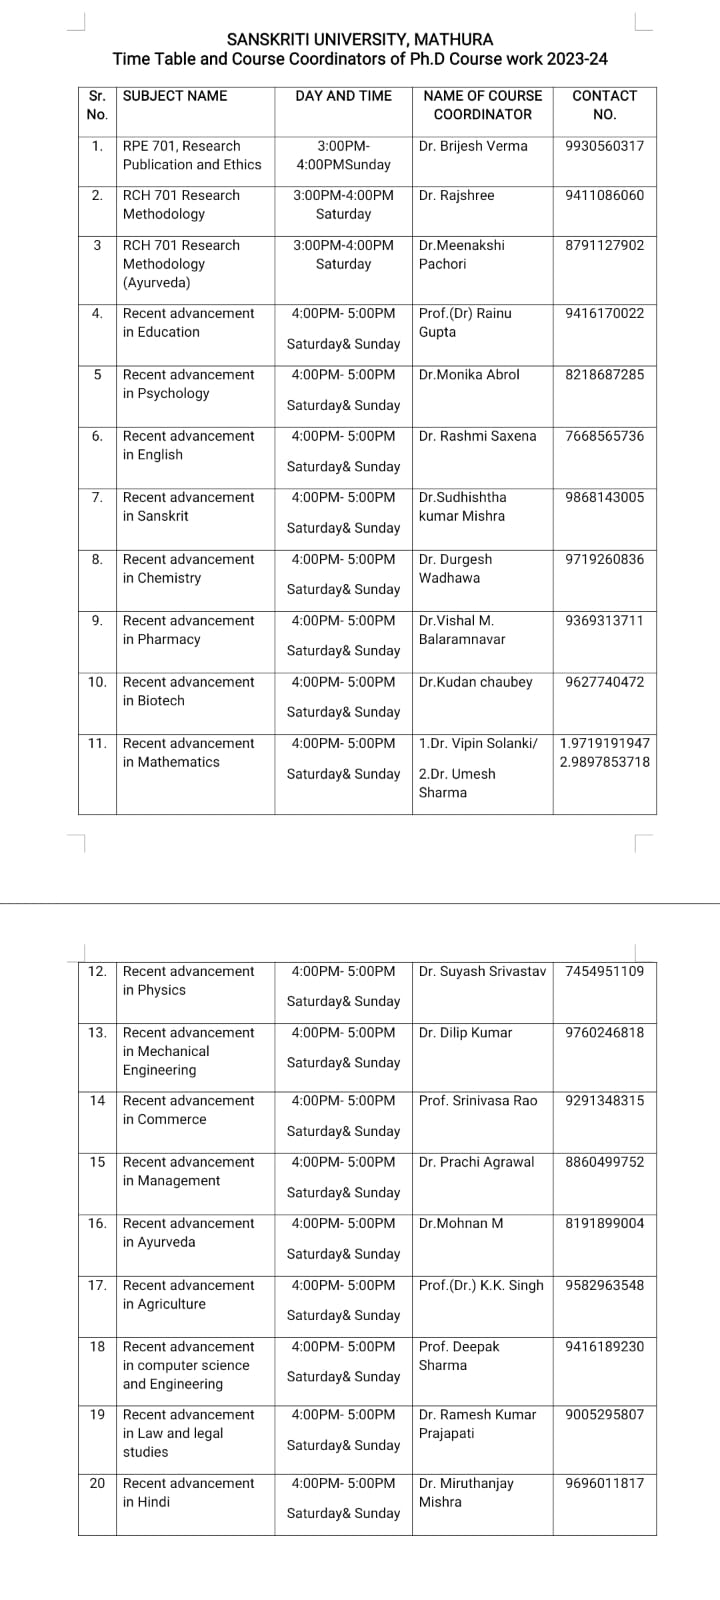 Time Table and Course Coordinators of Ph.D Course Work 2023-24